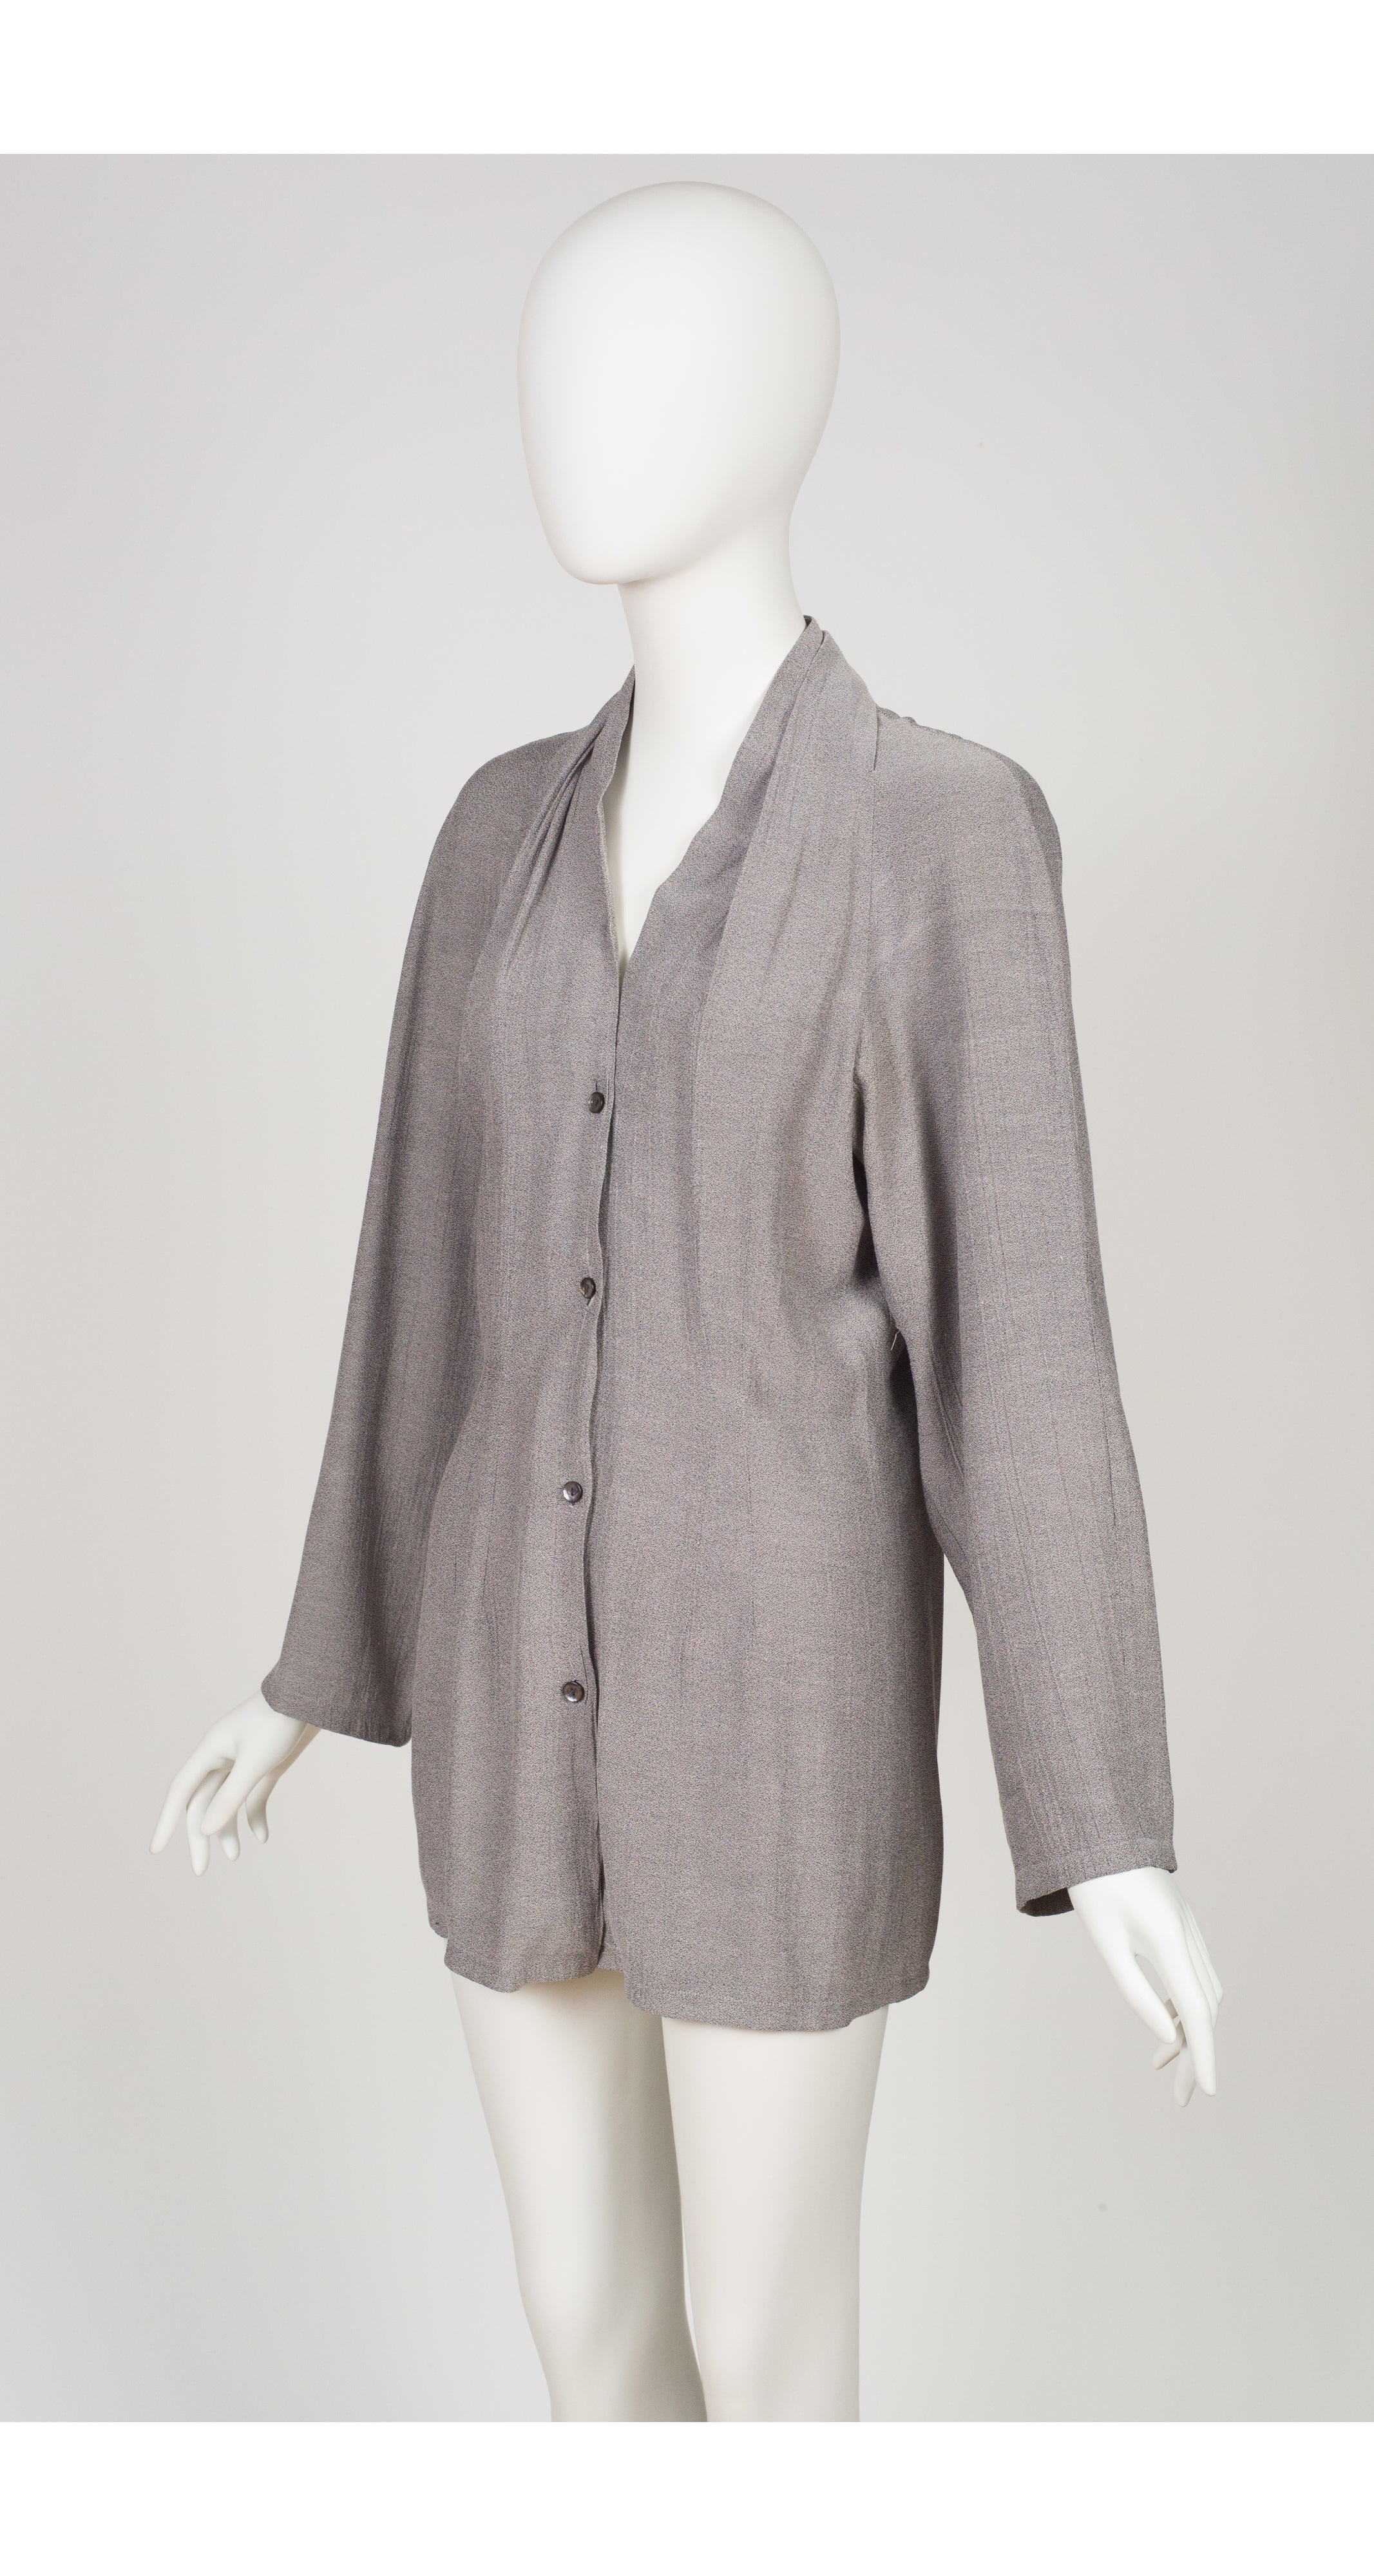 1987-88 F/W "The Rose" Collection Gray Light Jacket